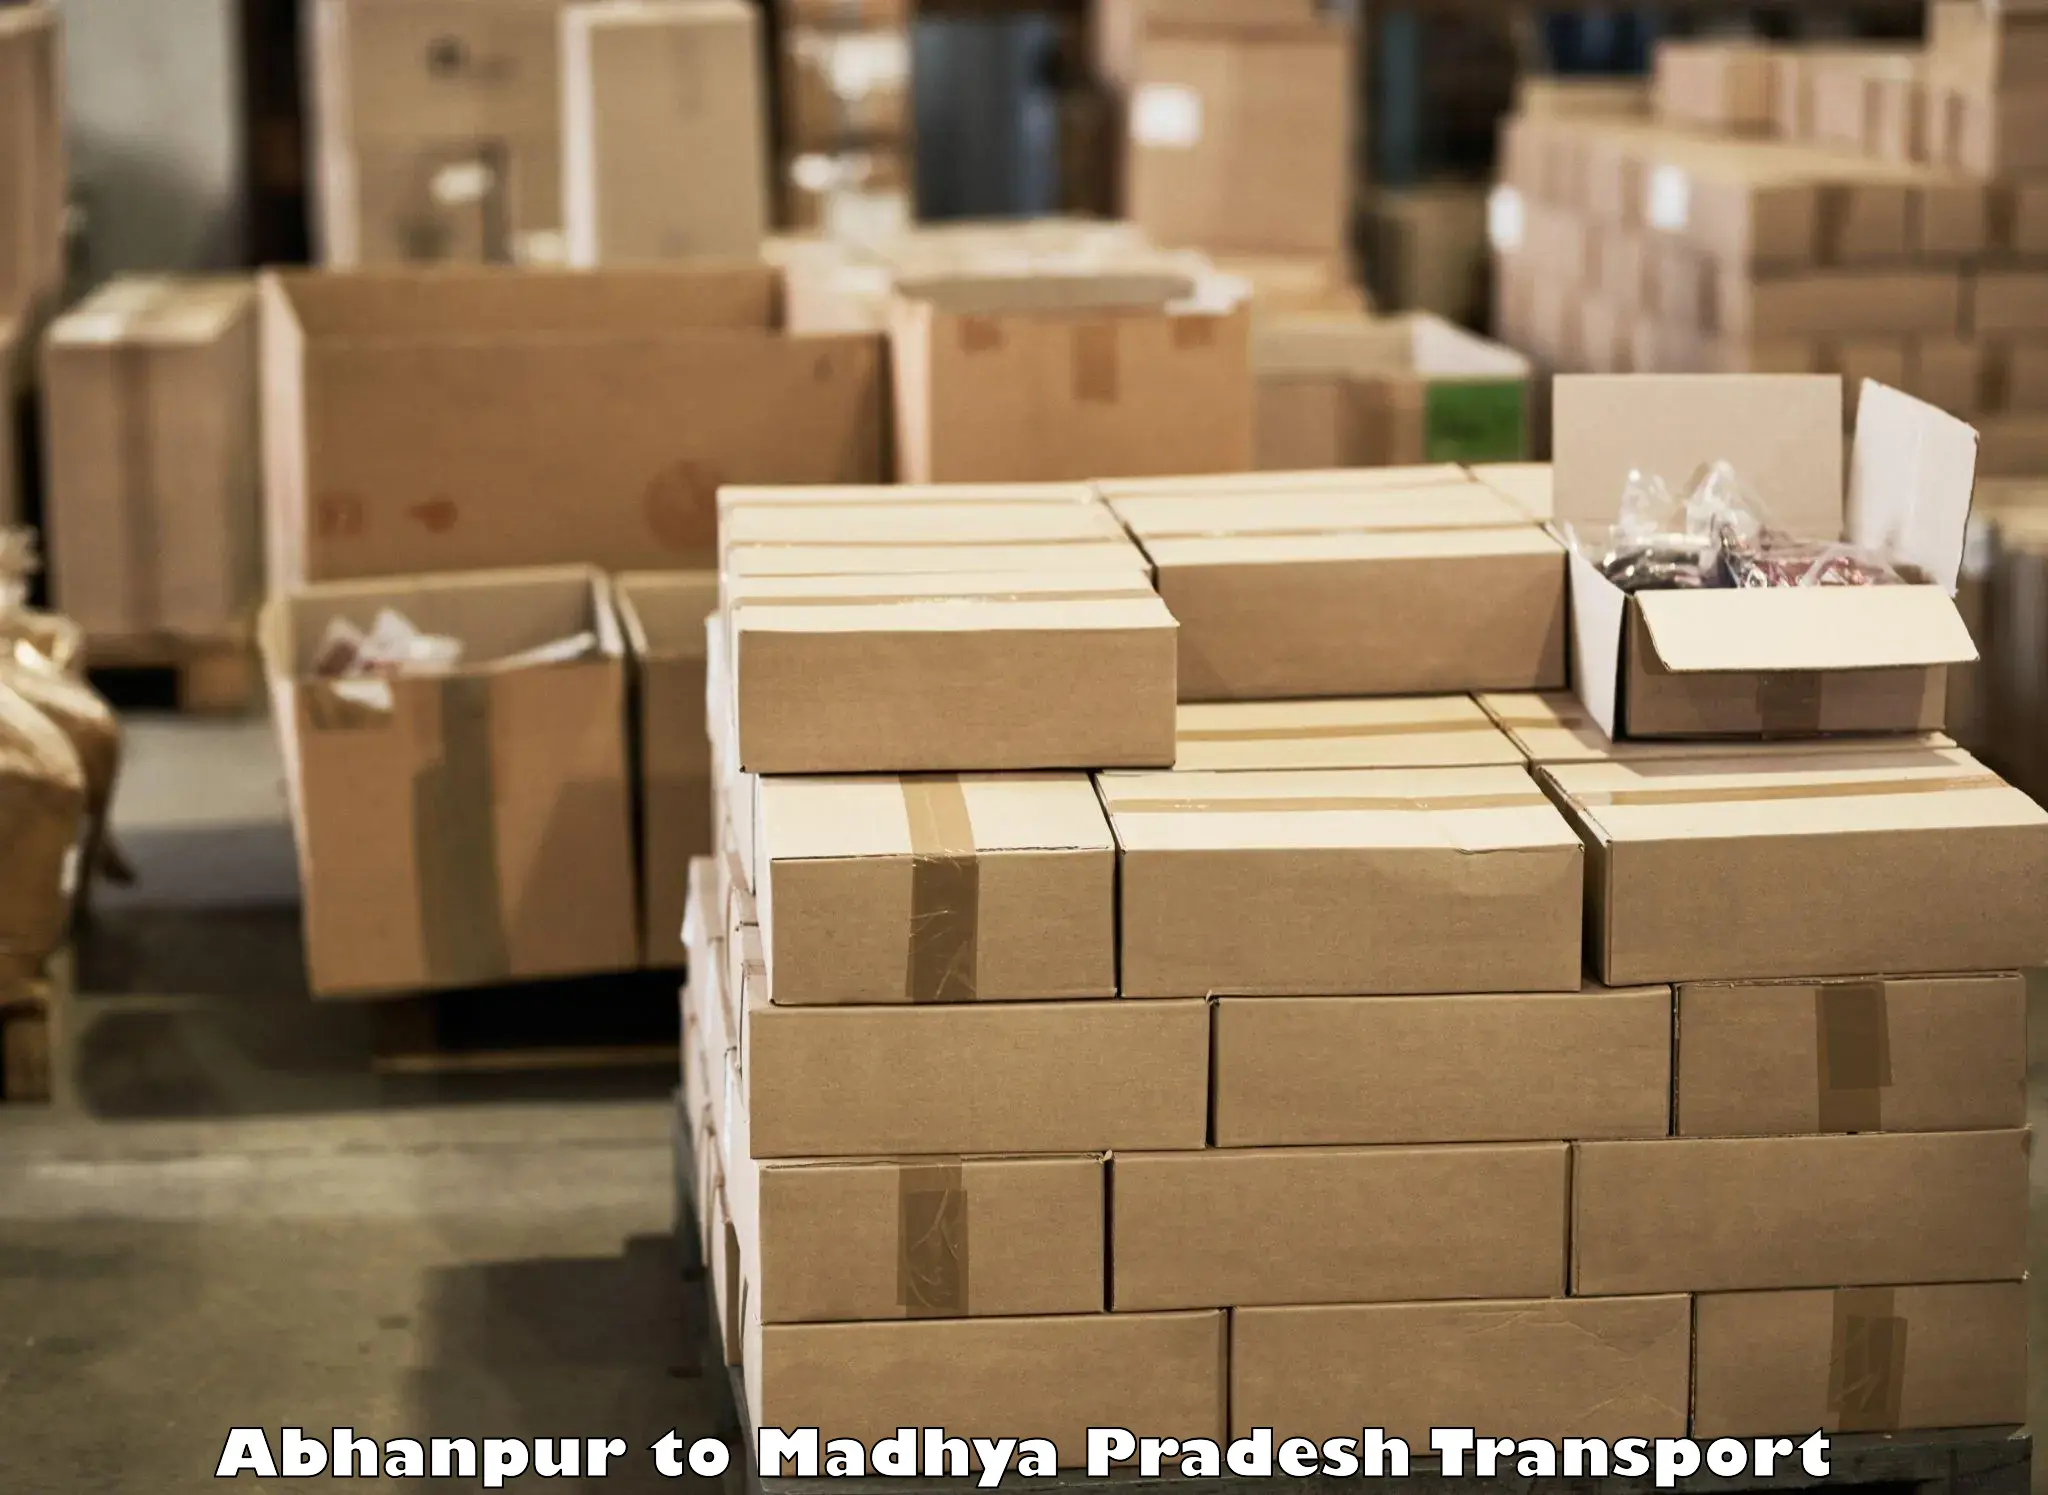 Container transport service Abhanpur to Udaipura